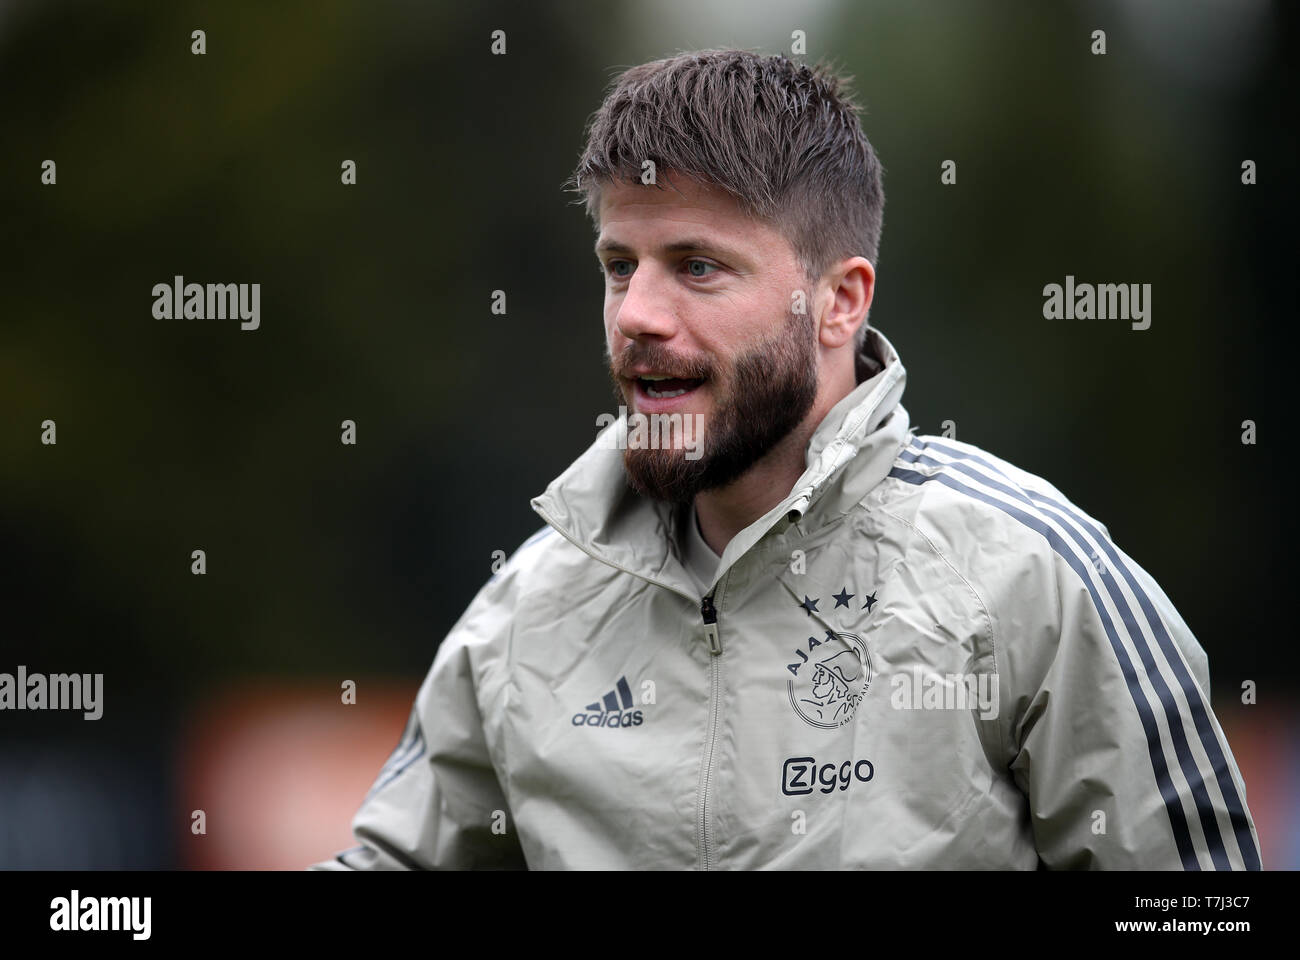 Ajax's Lasse Schone during a training session at Toekomst Training Ground, Amsterdam. Stock Photo